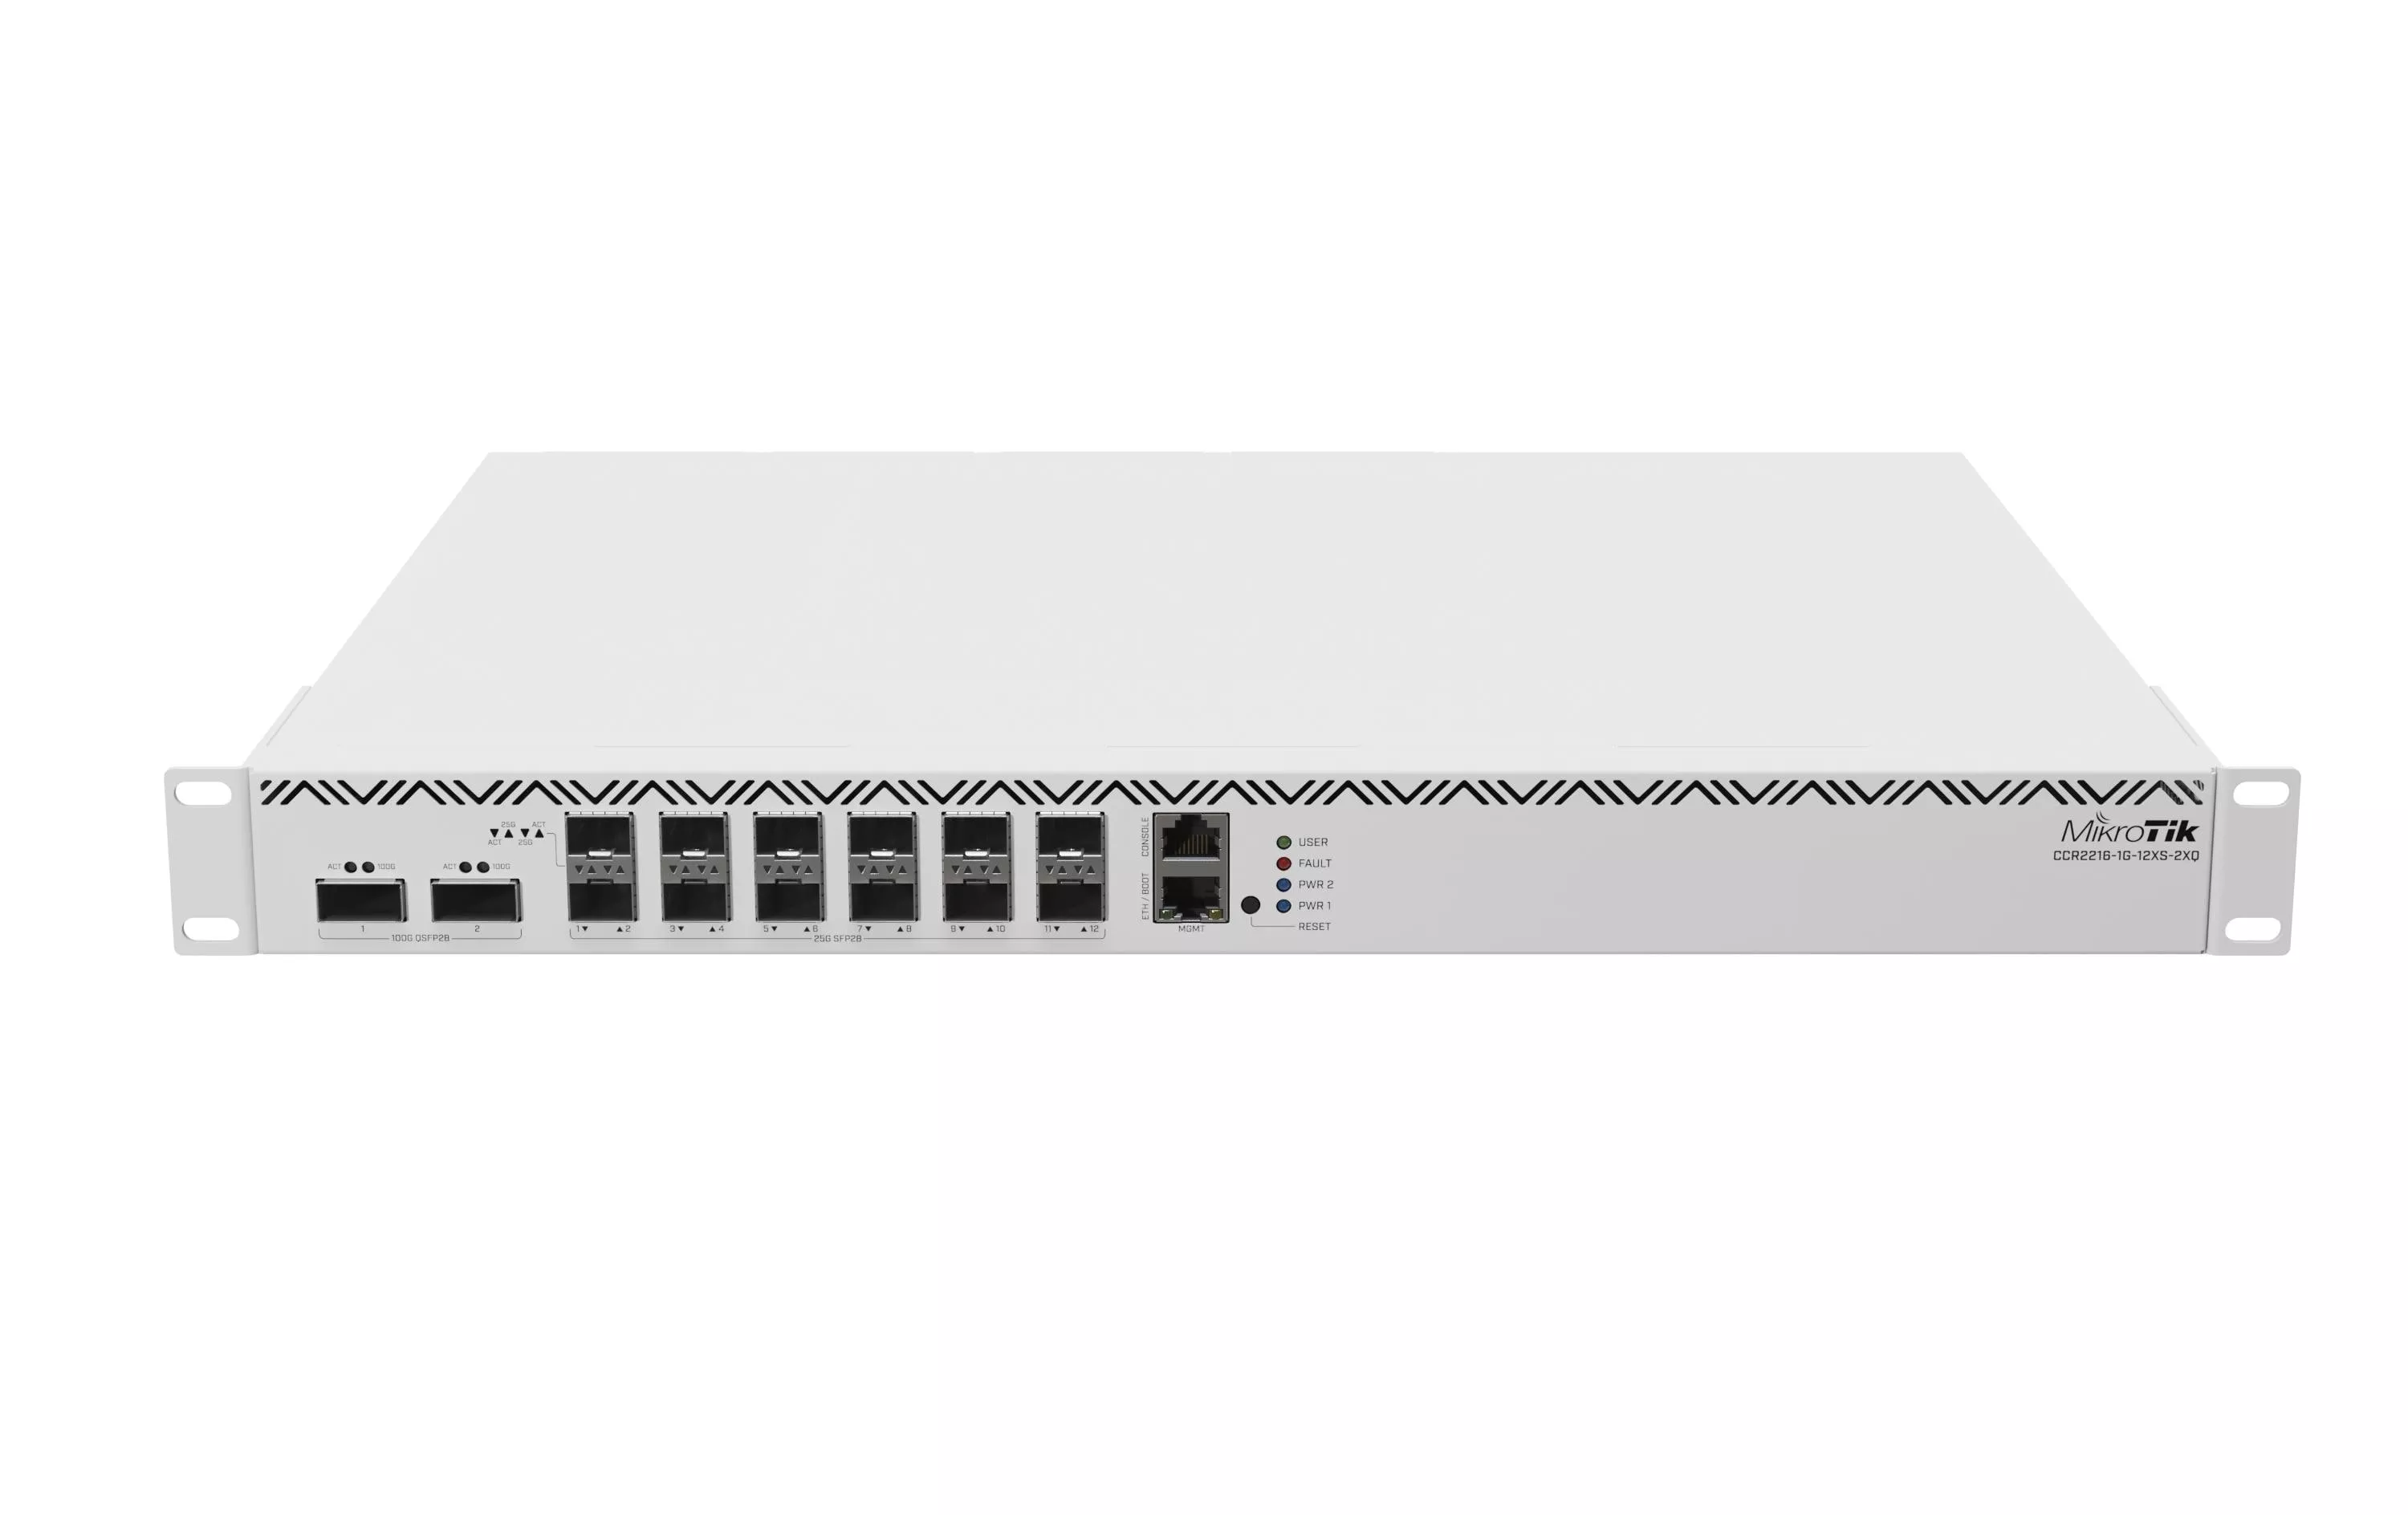 Router CCR2216-1G-12XS-2XQ